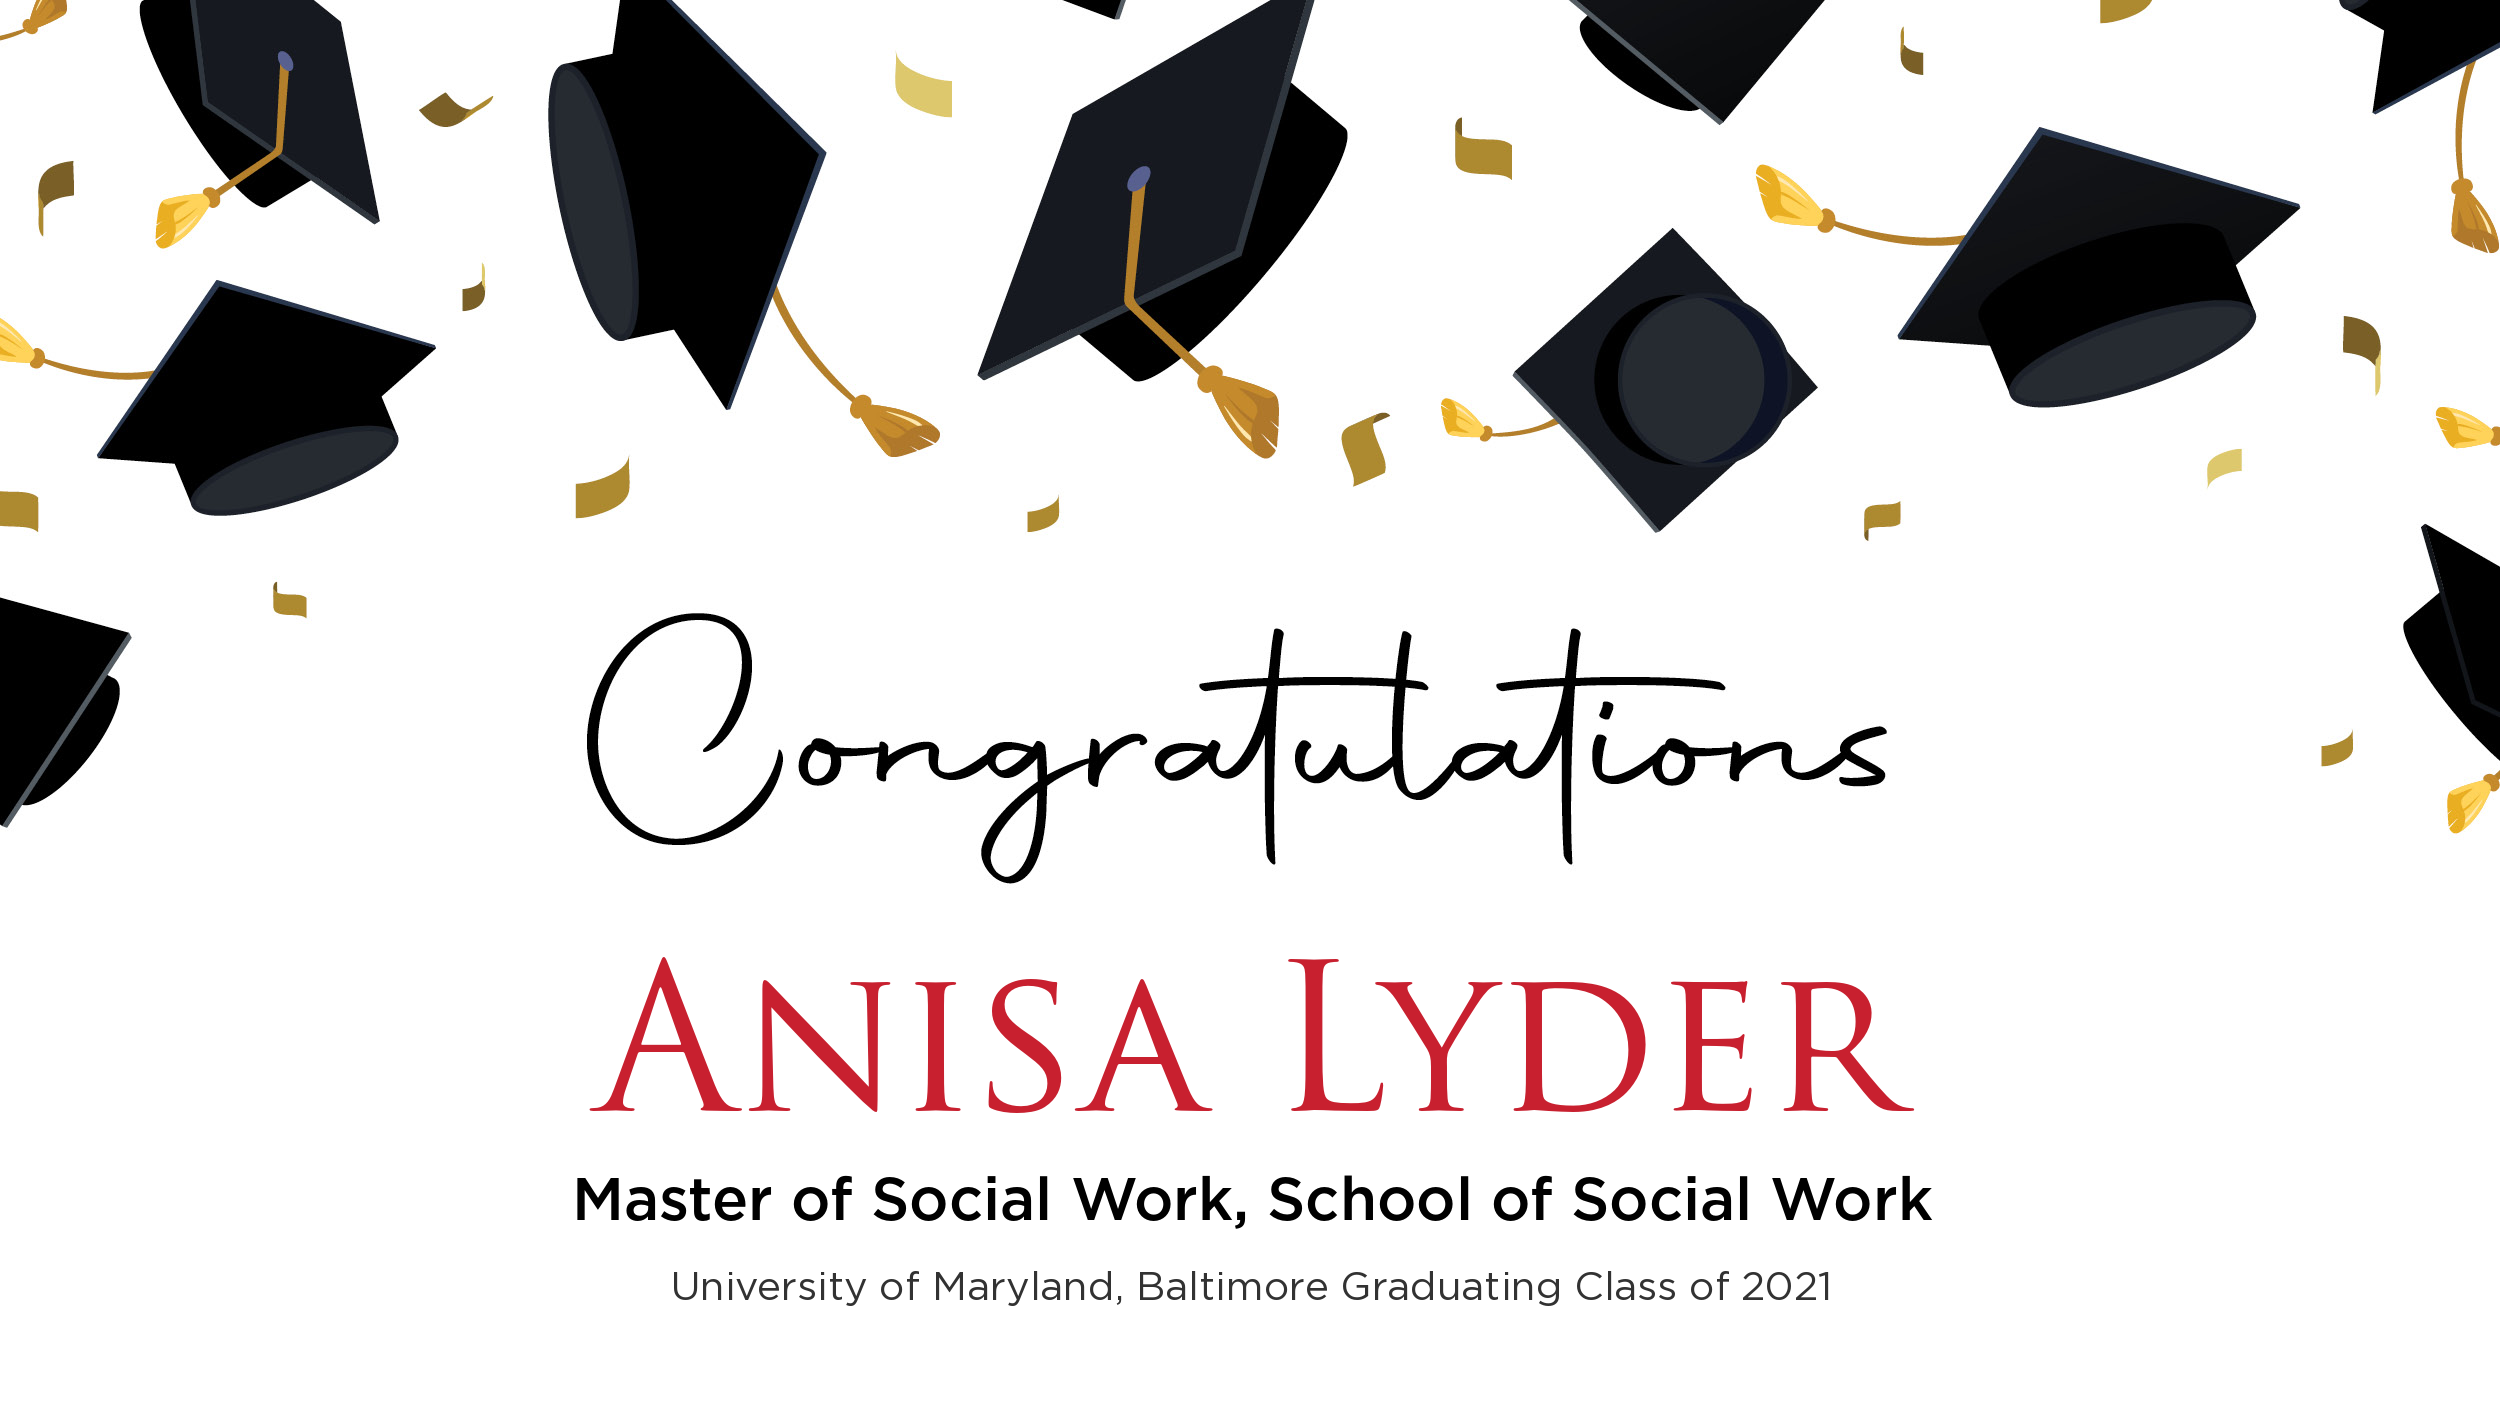 Congratulations Anisa Lyder, Master of Social Work